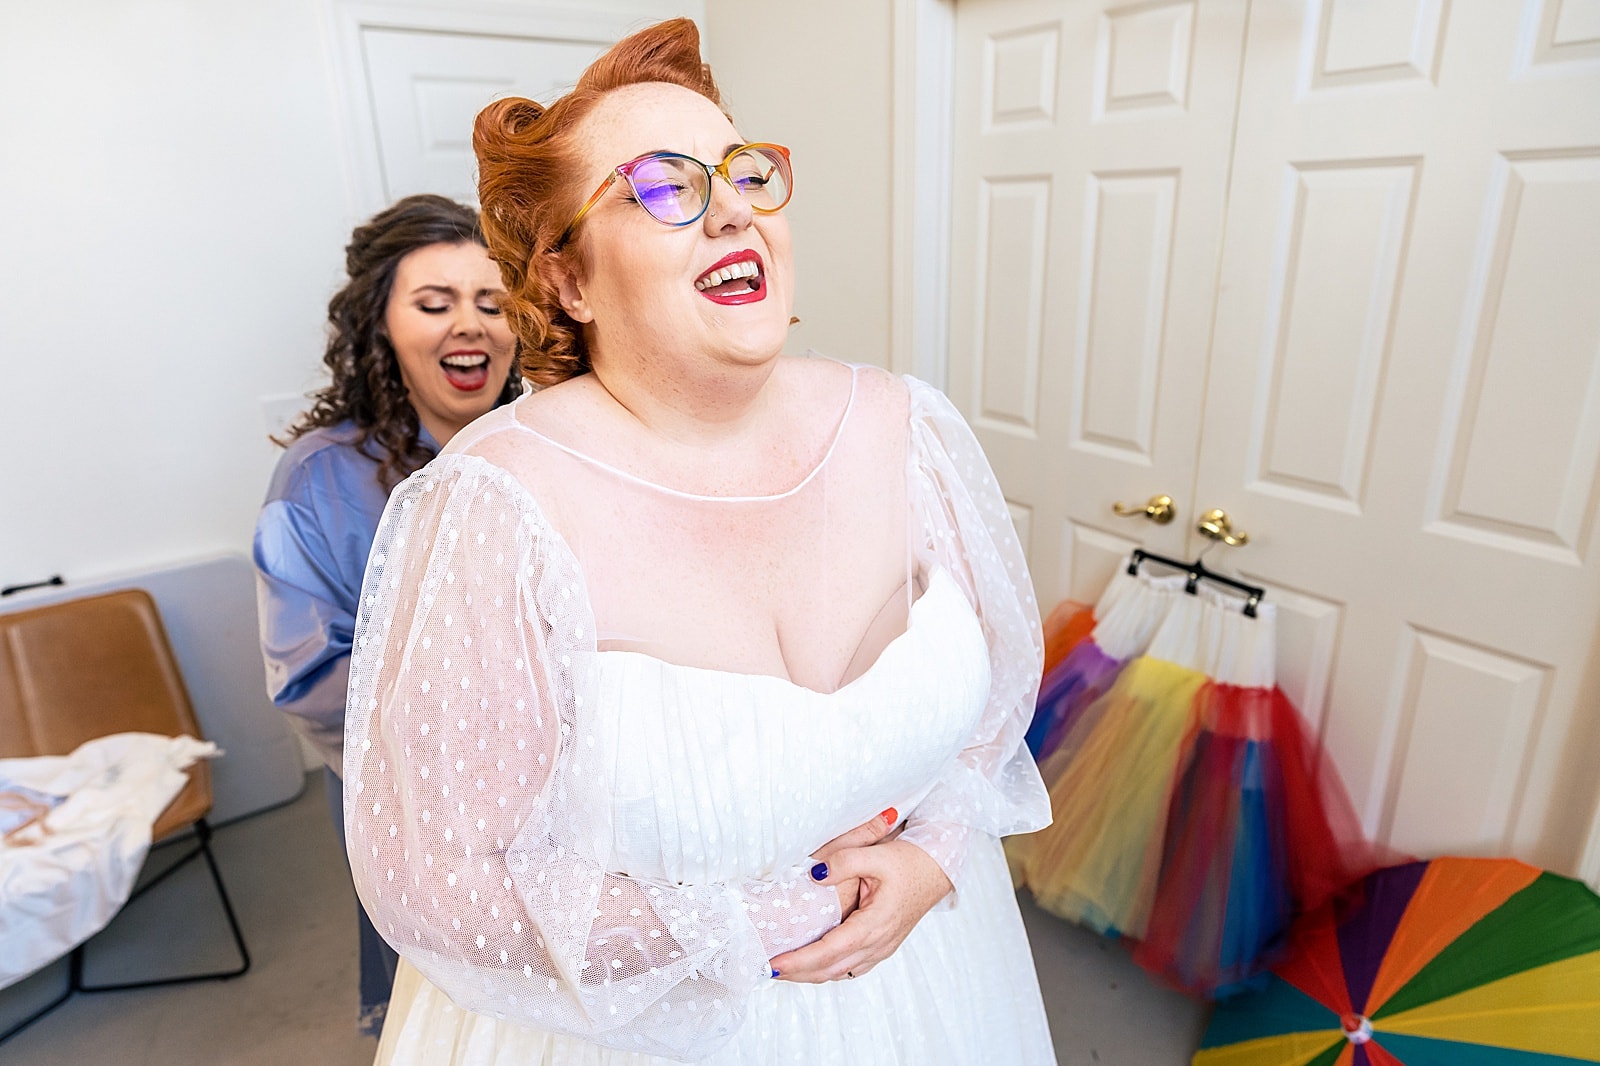 Loved all the rainbows and nerdiness at this Graham mill wedding